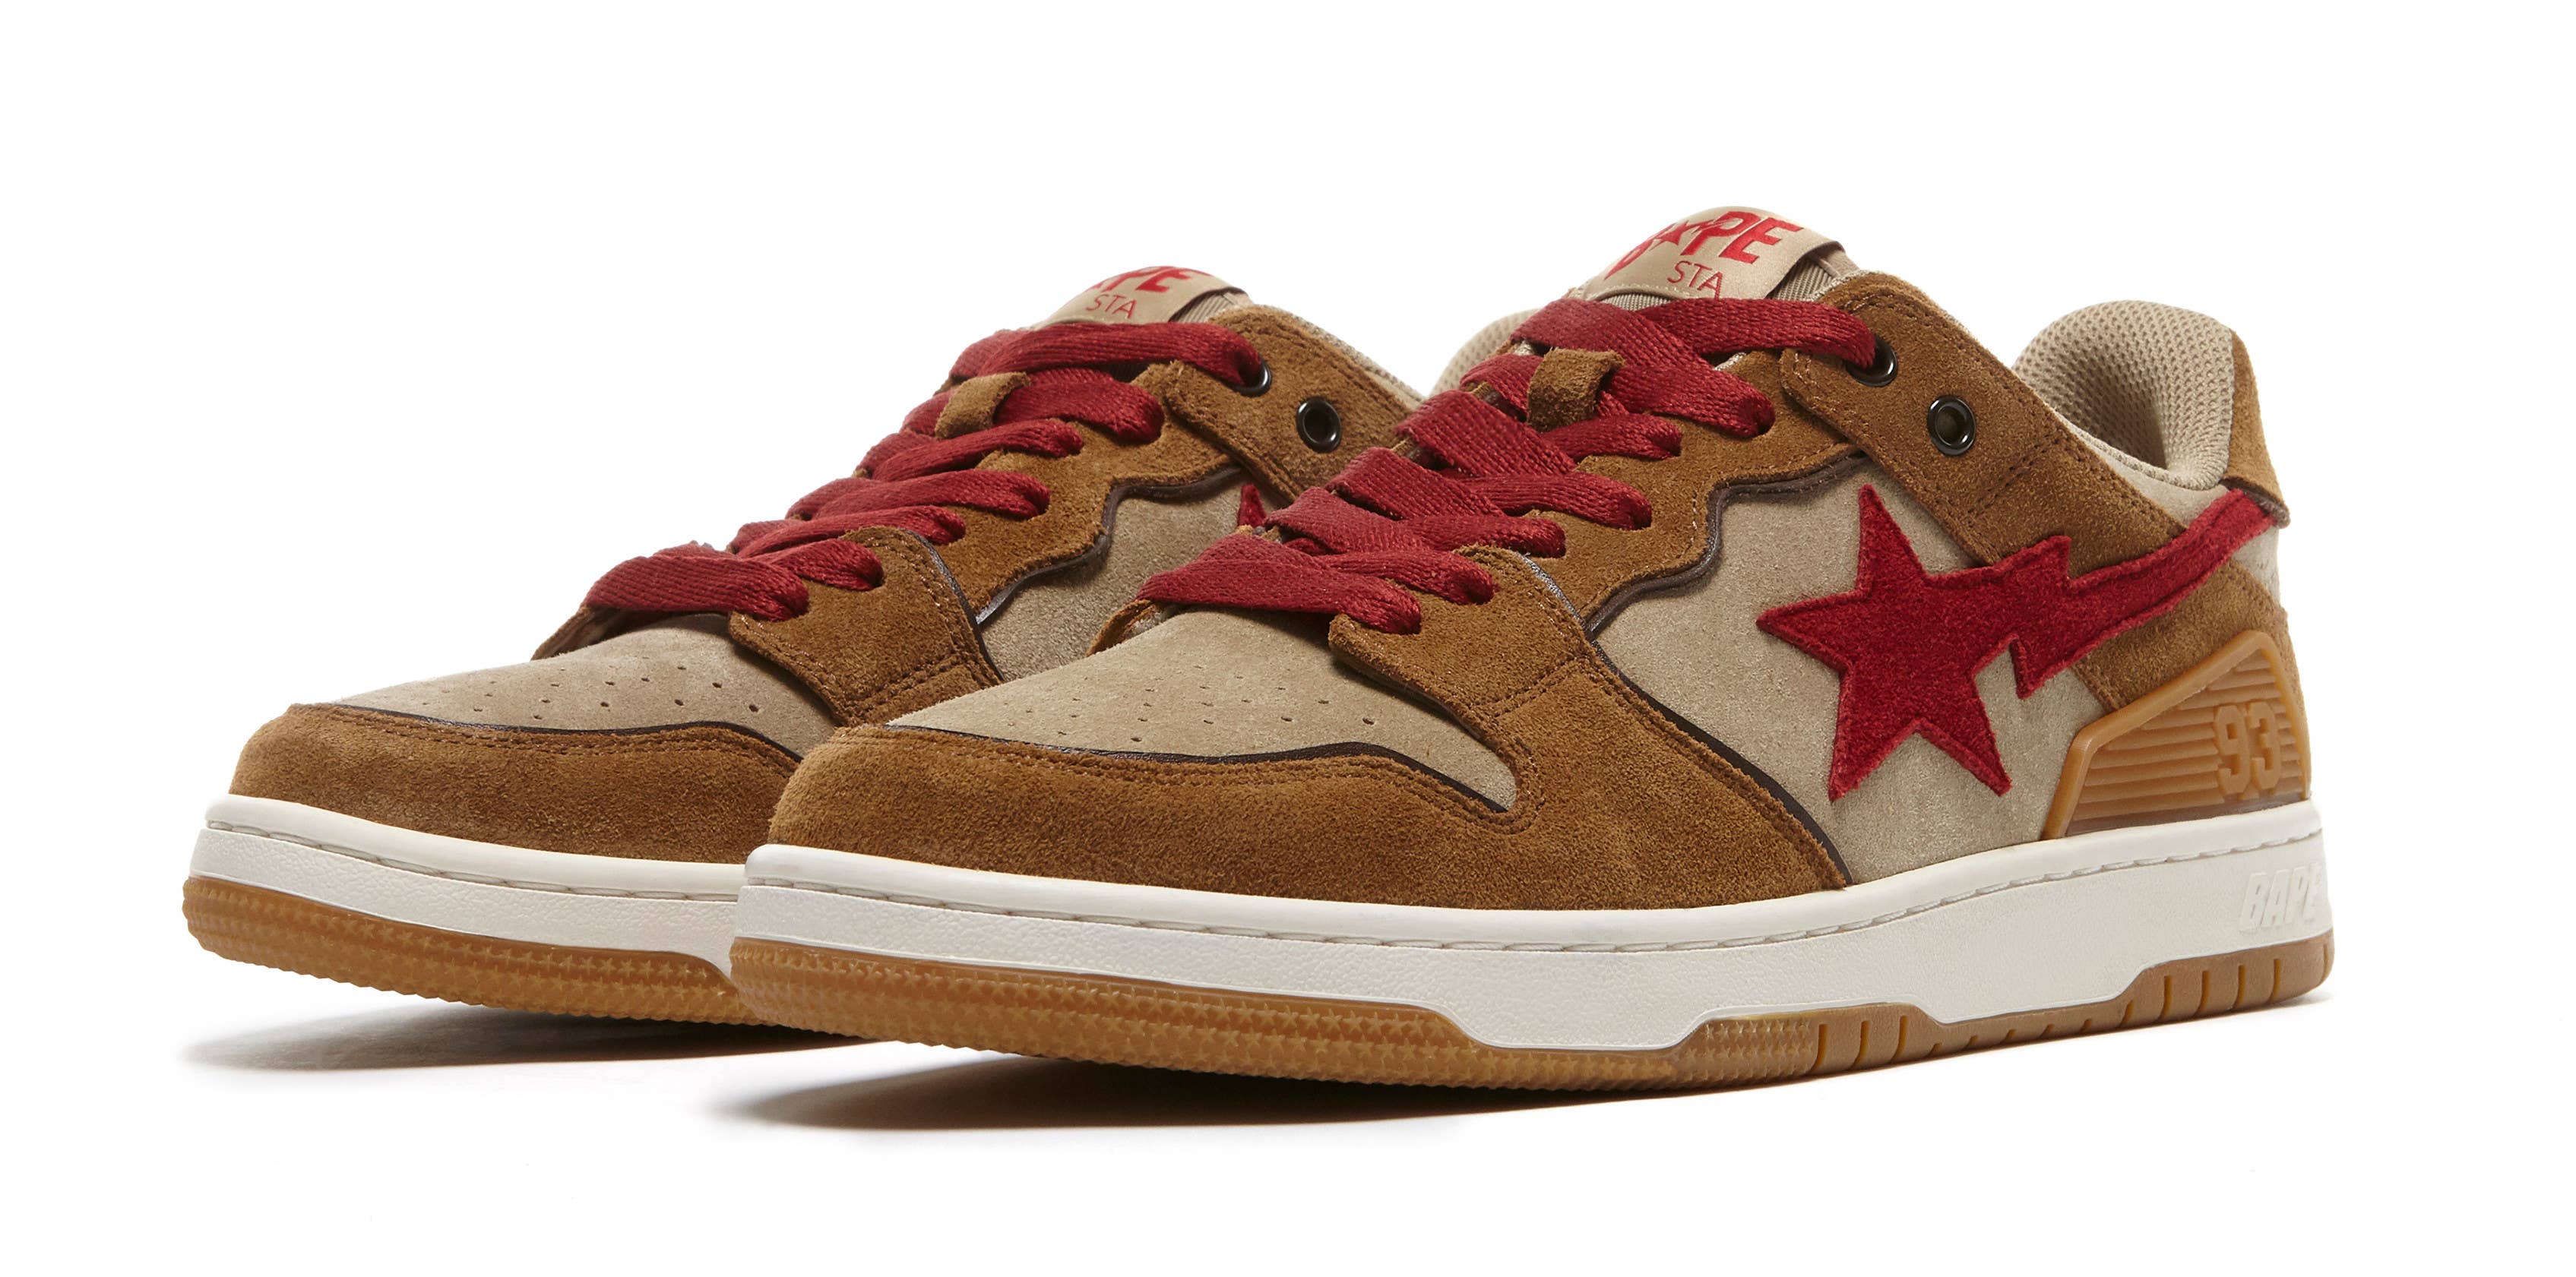 Bape Sk8 Sta Wheat and Red Pair